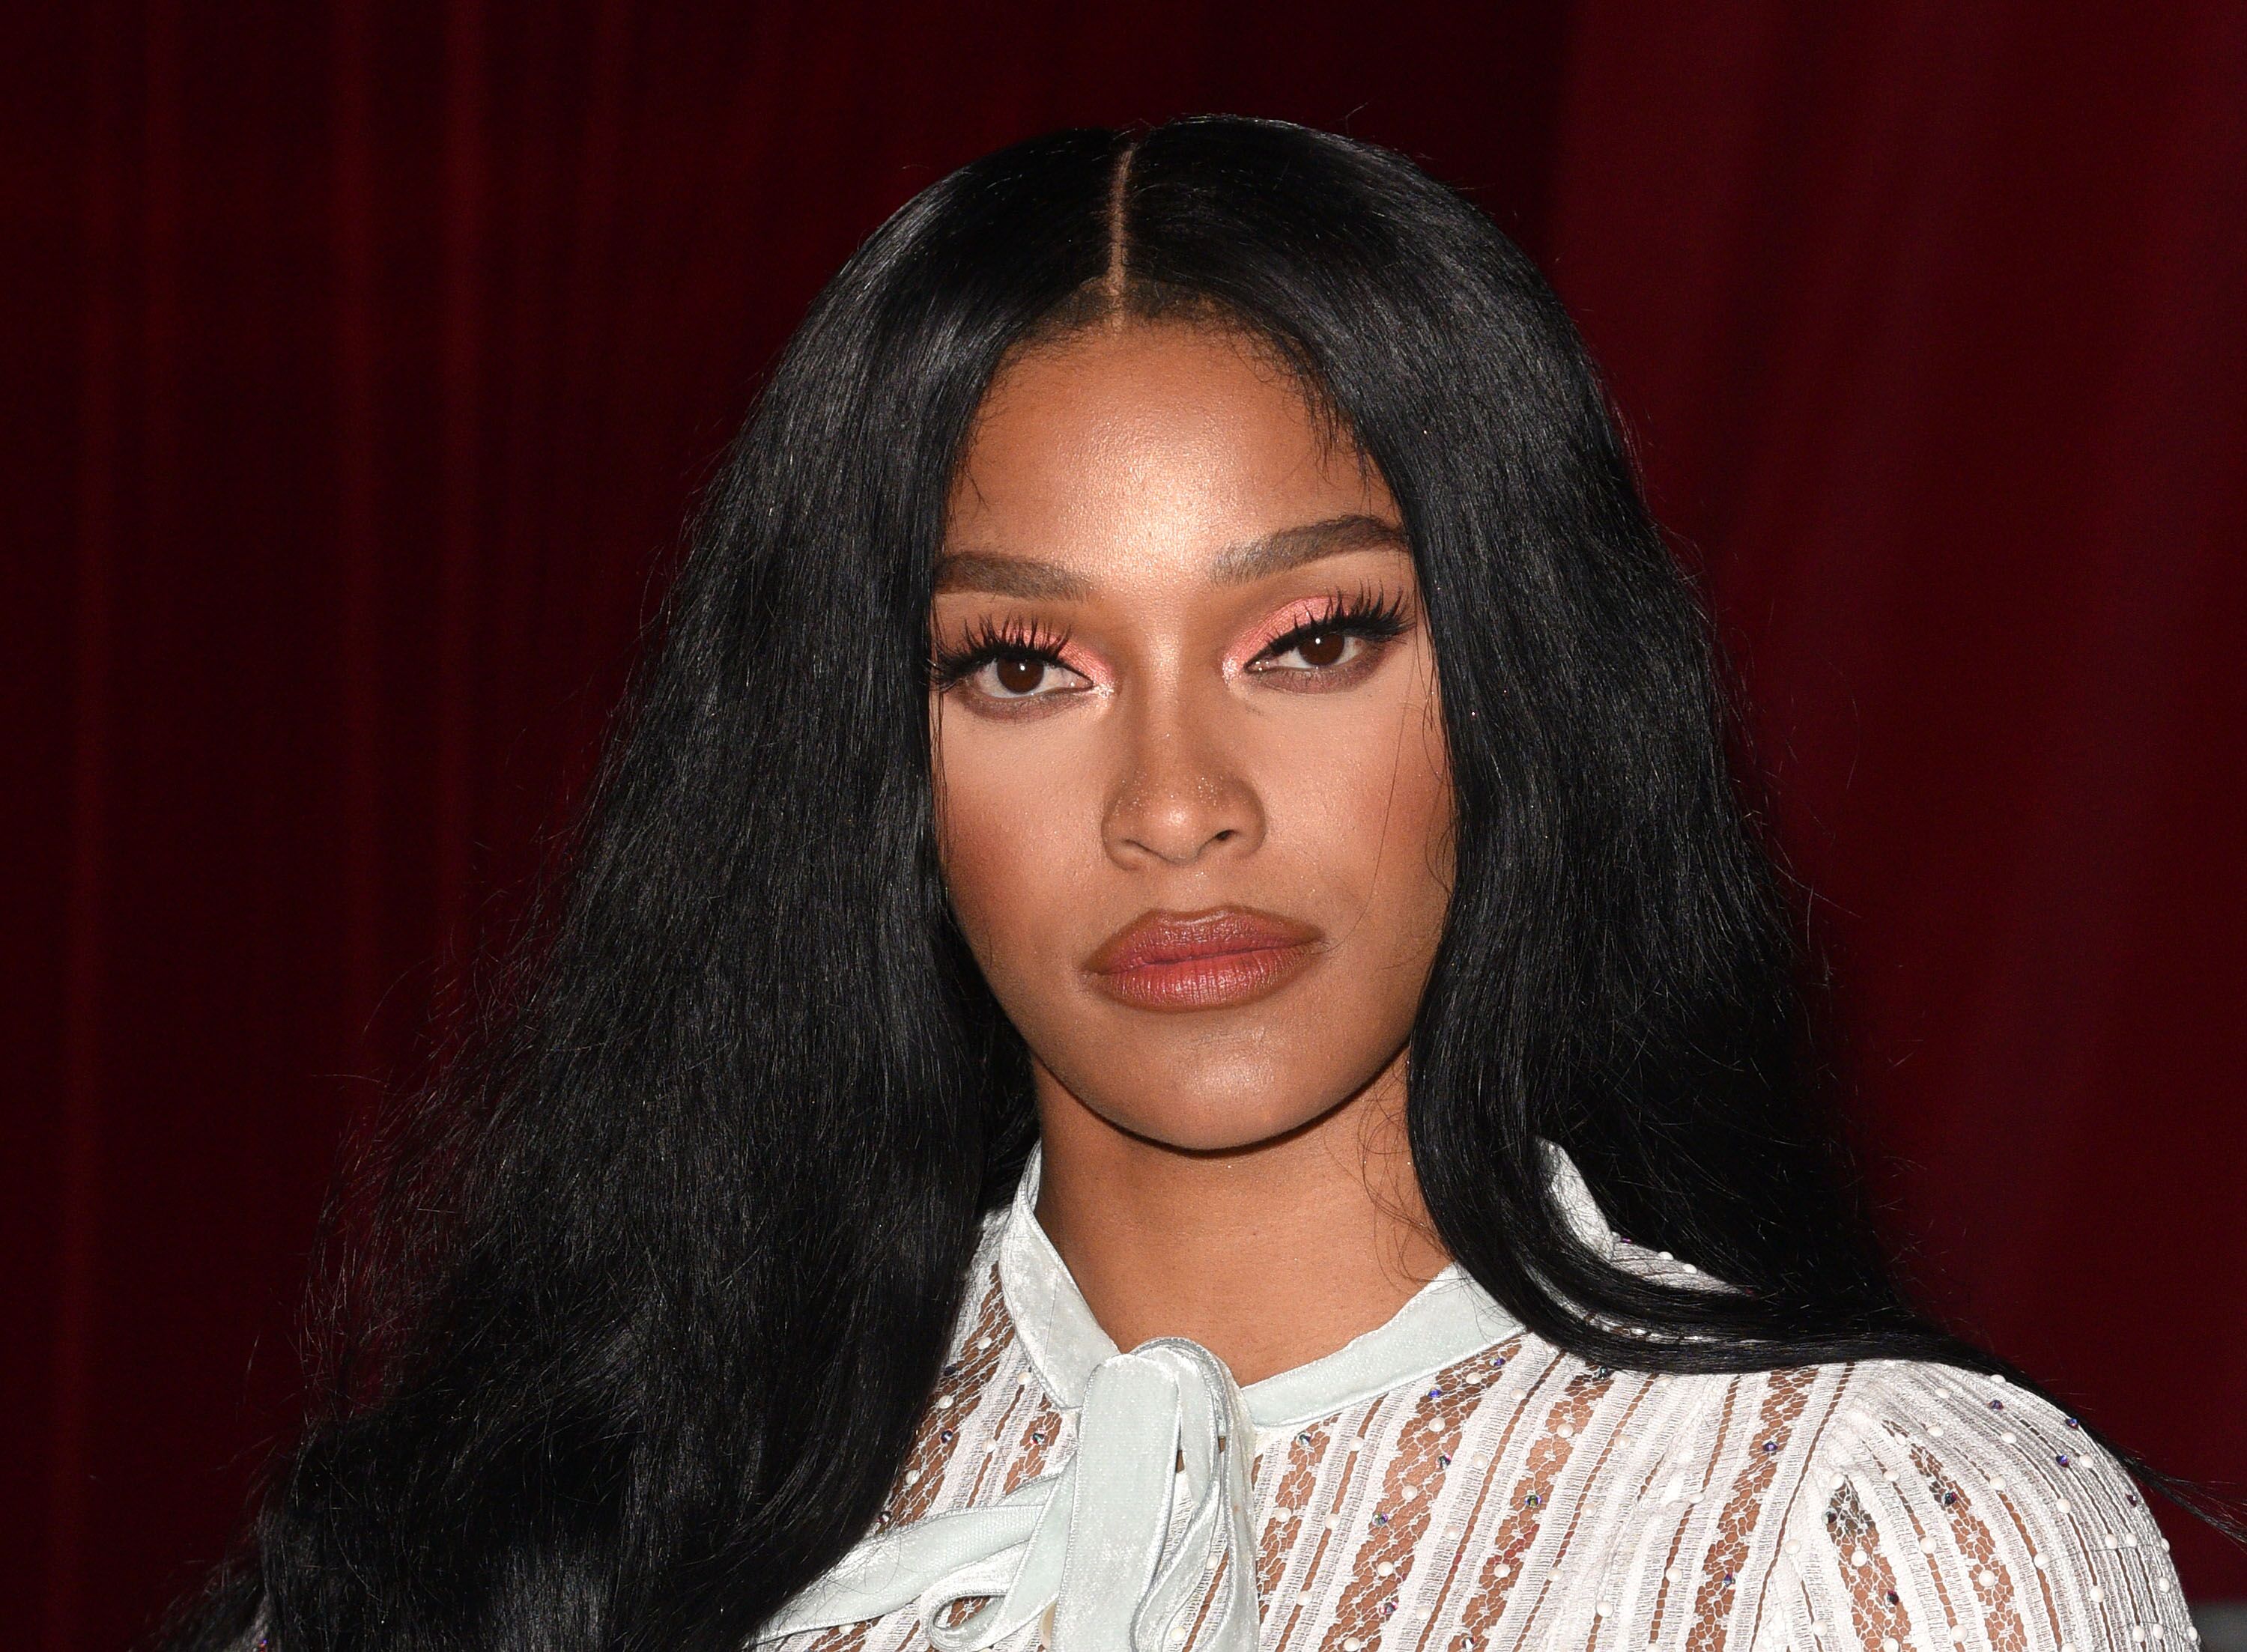 A close-up of Joseline Hernandez at an event | Source: Getty Images/GlobalImagesUkraine